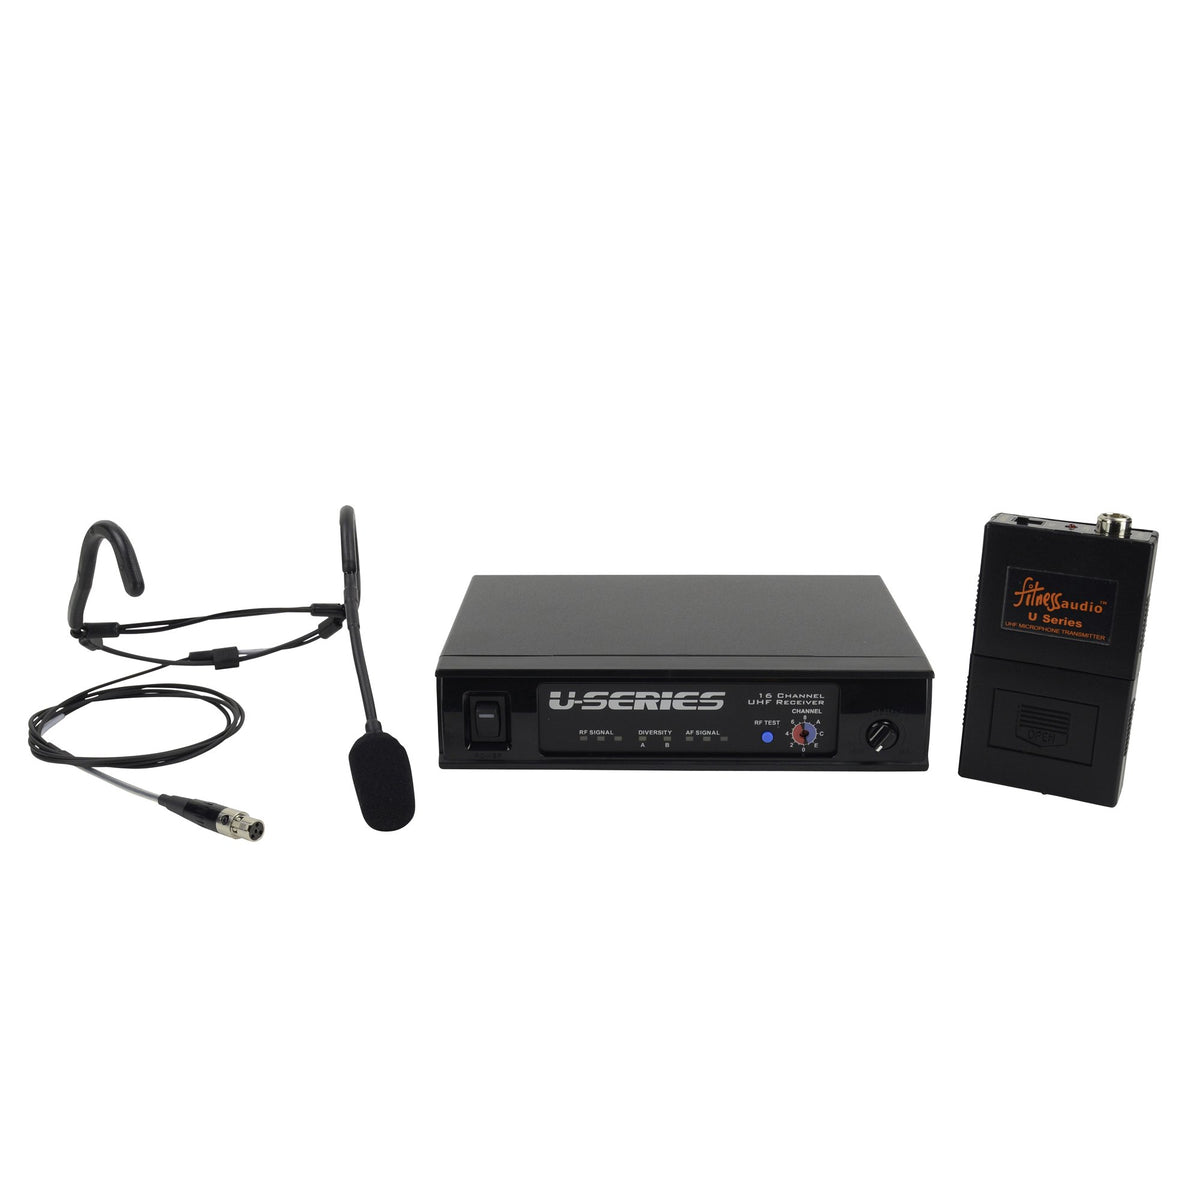 Wireless Mic, Mini Mixer &amp; Sound Card For Live Streaming Voice &amp; Music